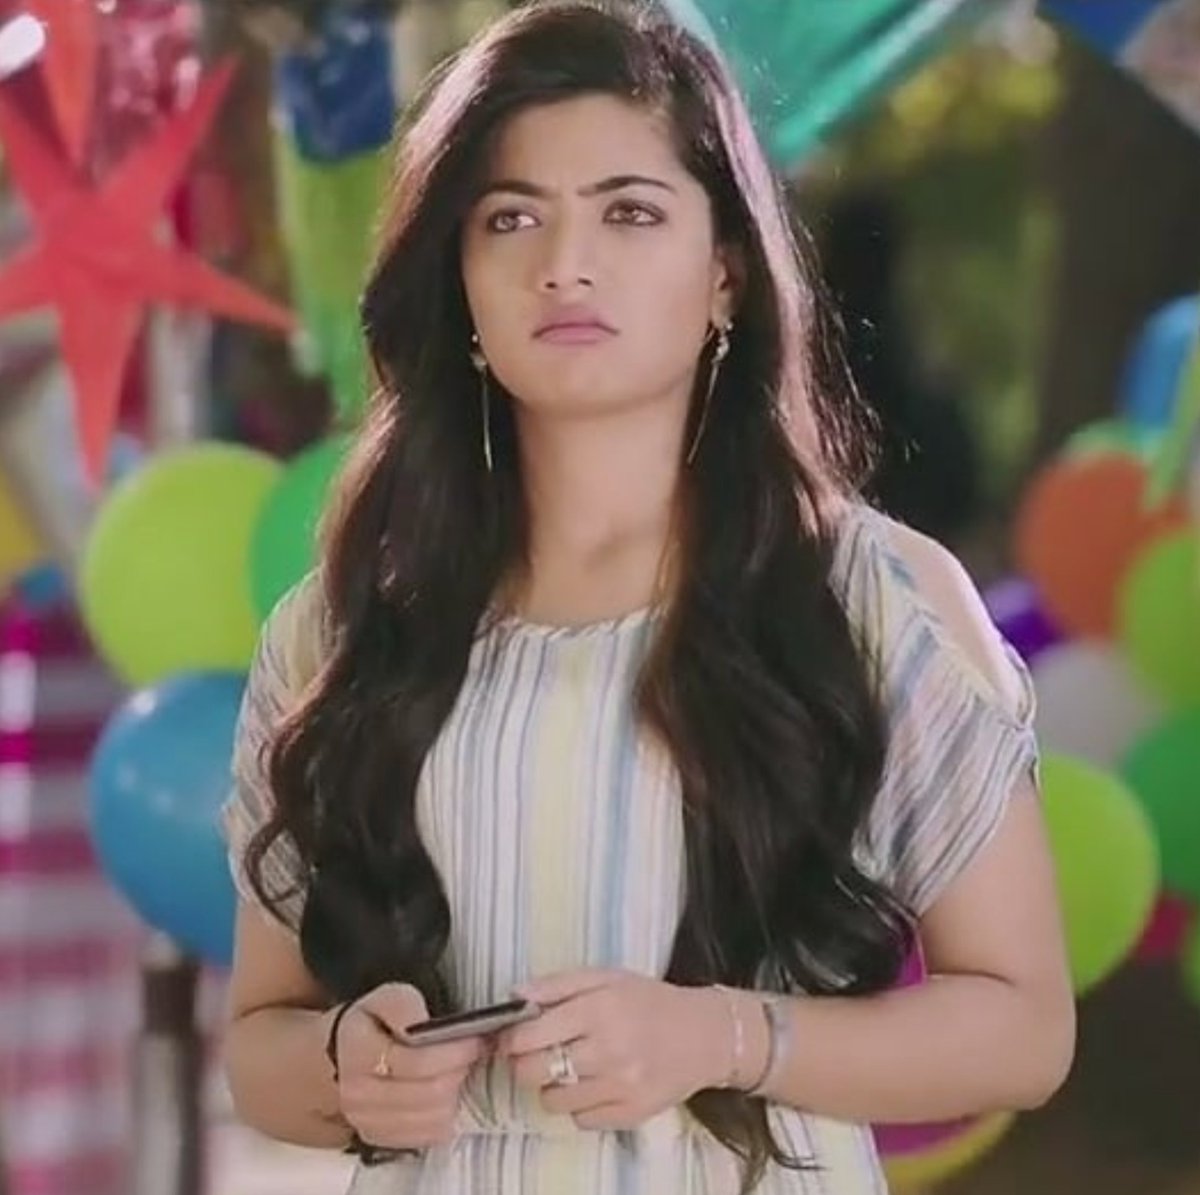 Chalo release in February 2018 and became an instant hit and with that grew the legend of Rashmika madam's lucky hand and her impeccable story selection. When she was shooting for Chalo, ma'am also signed her biggest movie Geetha Govindam  #HappyBirthdayRashmika  @iamRashmika